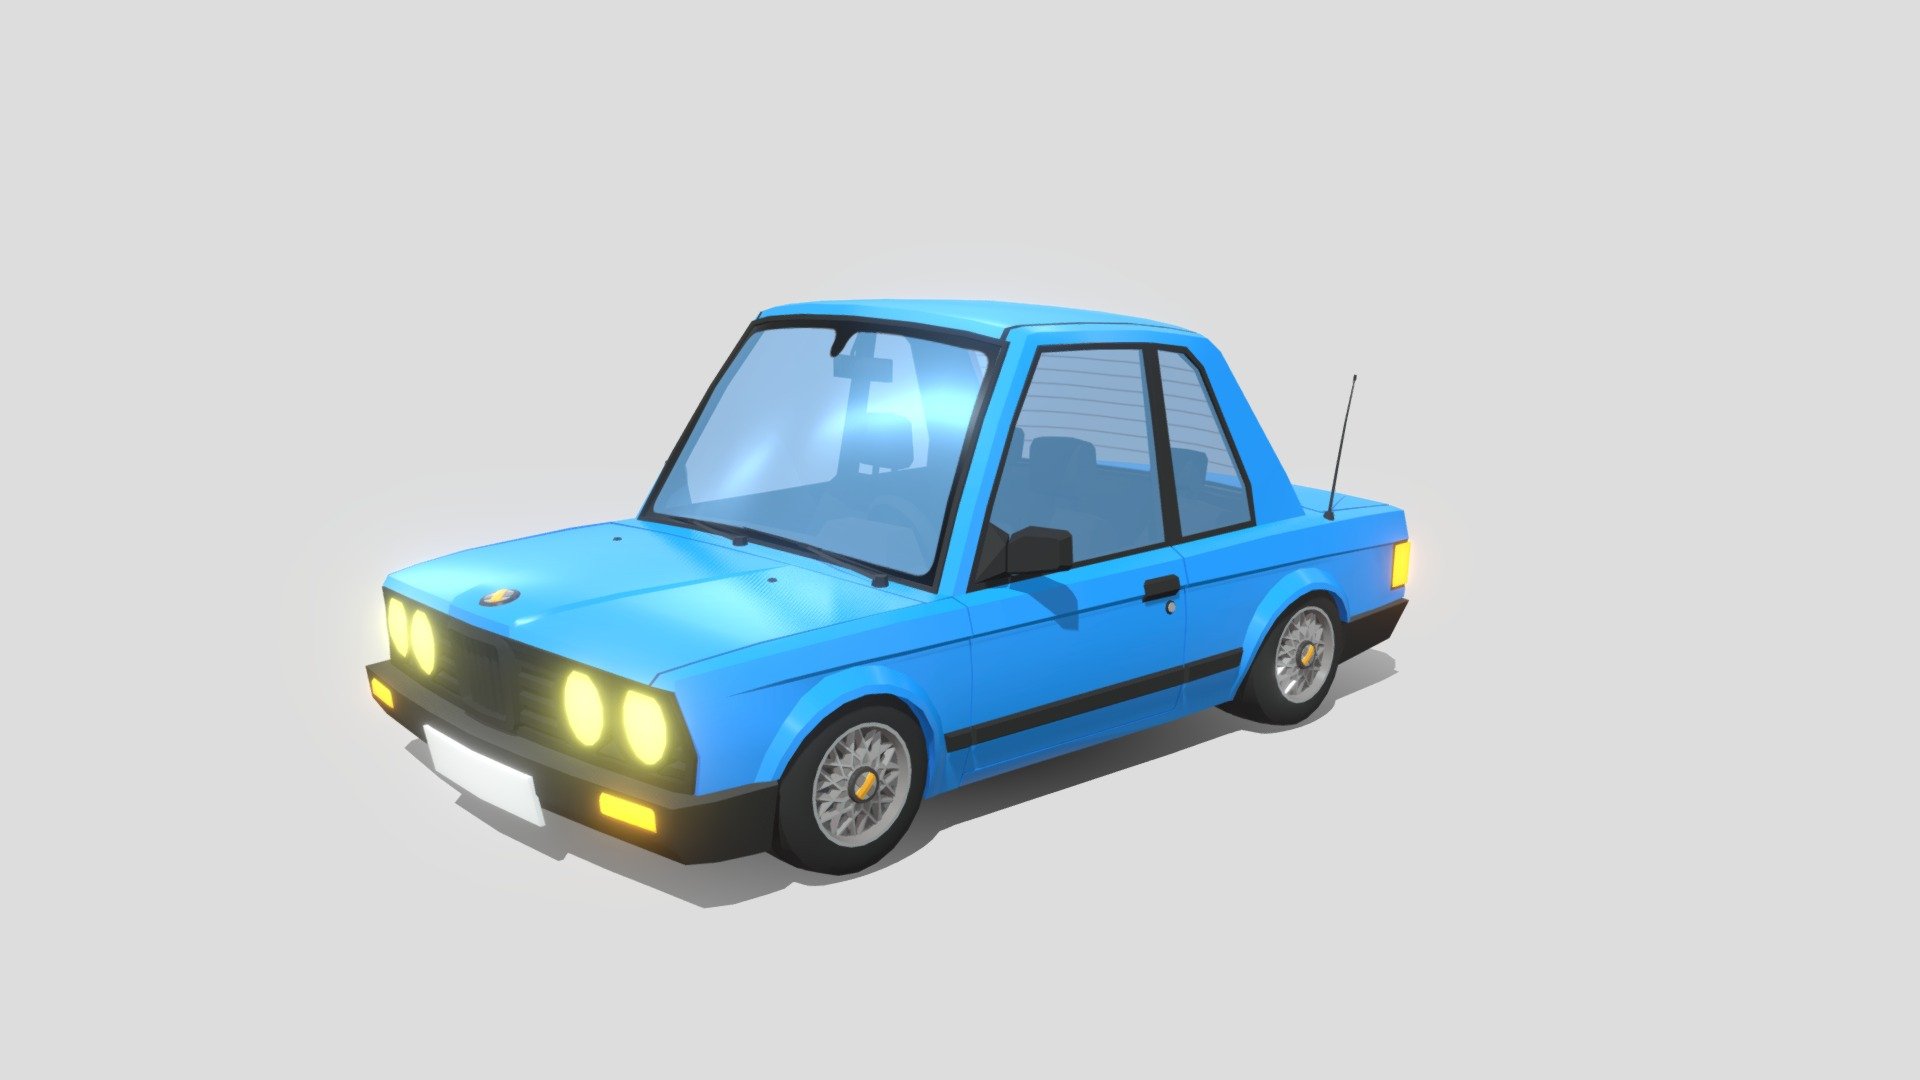 Car for your game or animation. You can disassemble it or blow it up in peaces. Have fun with it!
This model is part of still growing collection:
https://skfb.ly/ozpn9

Additional files include FBX for correct orientation with Unity WheelCollider - Low poly car classic coupe - Download Free 3D model by arturs.vitas 3d model